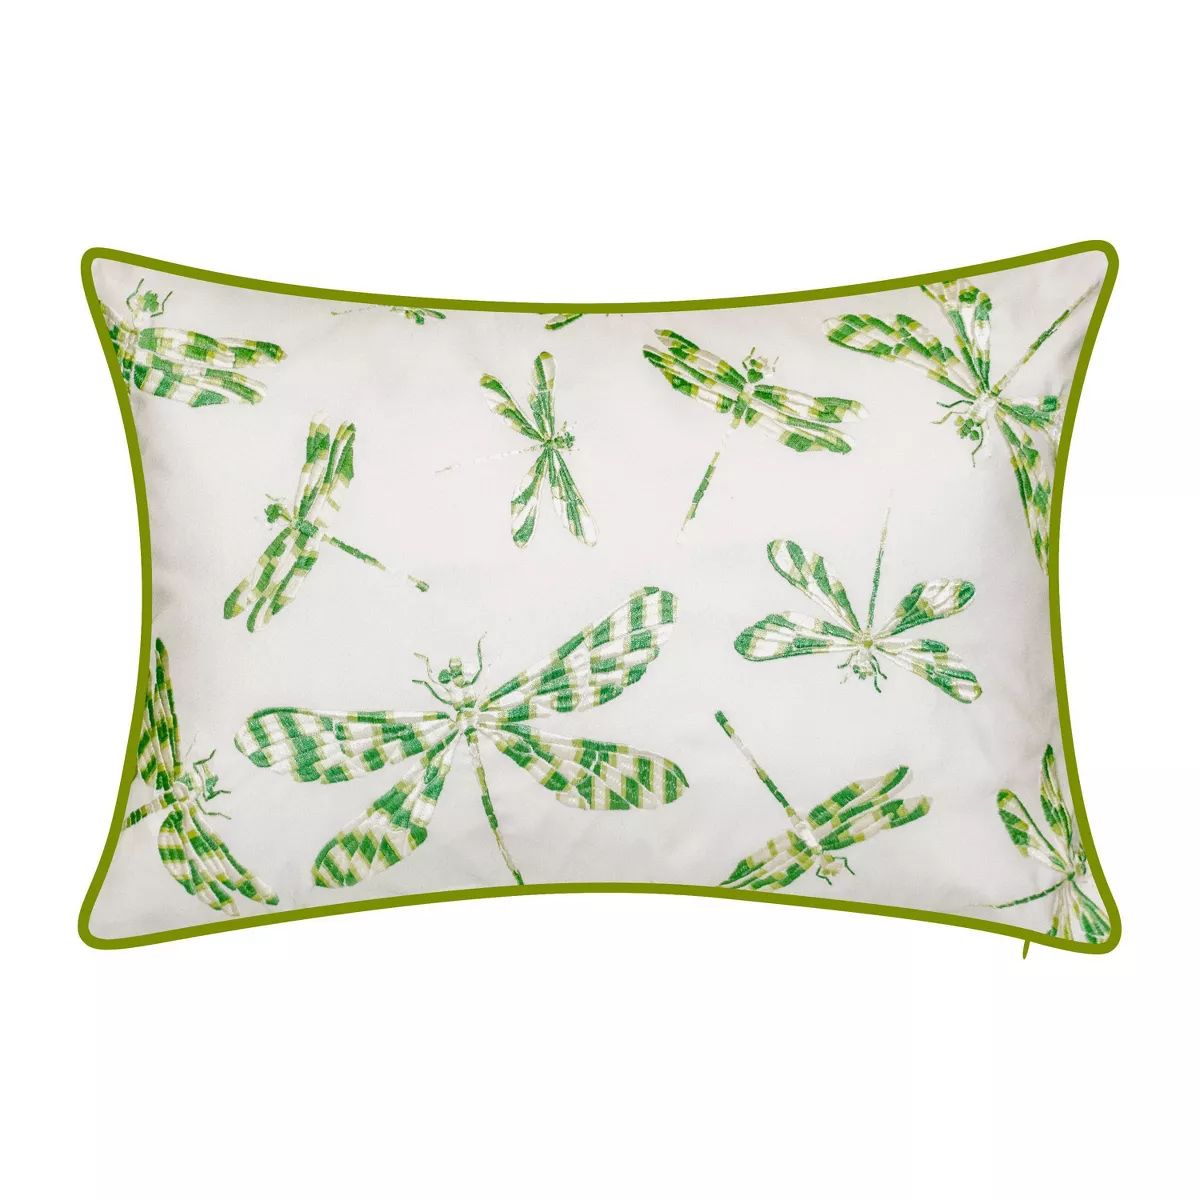 Embroidered Dragonflies Rectangular Indoor/Outdoor Throw Pillow Leaf Green/White - Edie@Home | Target